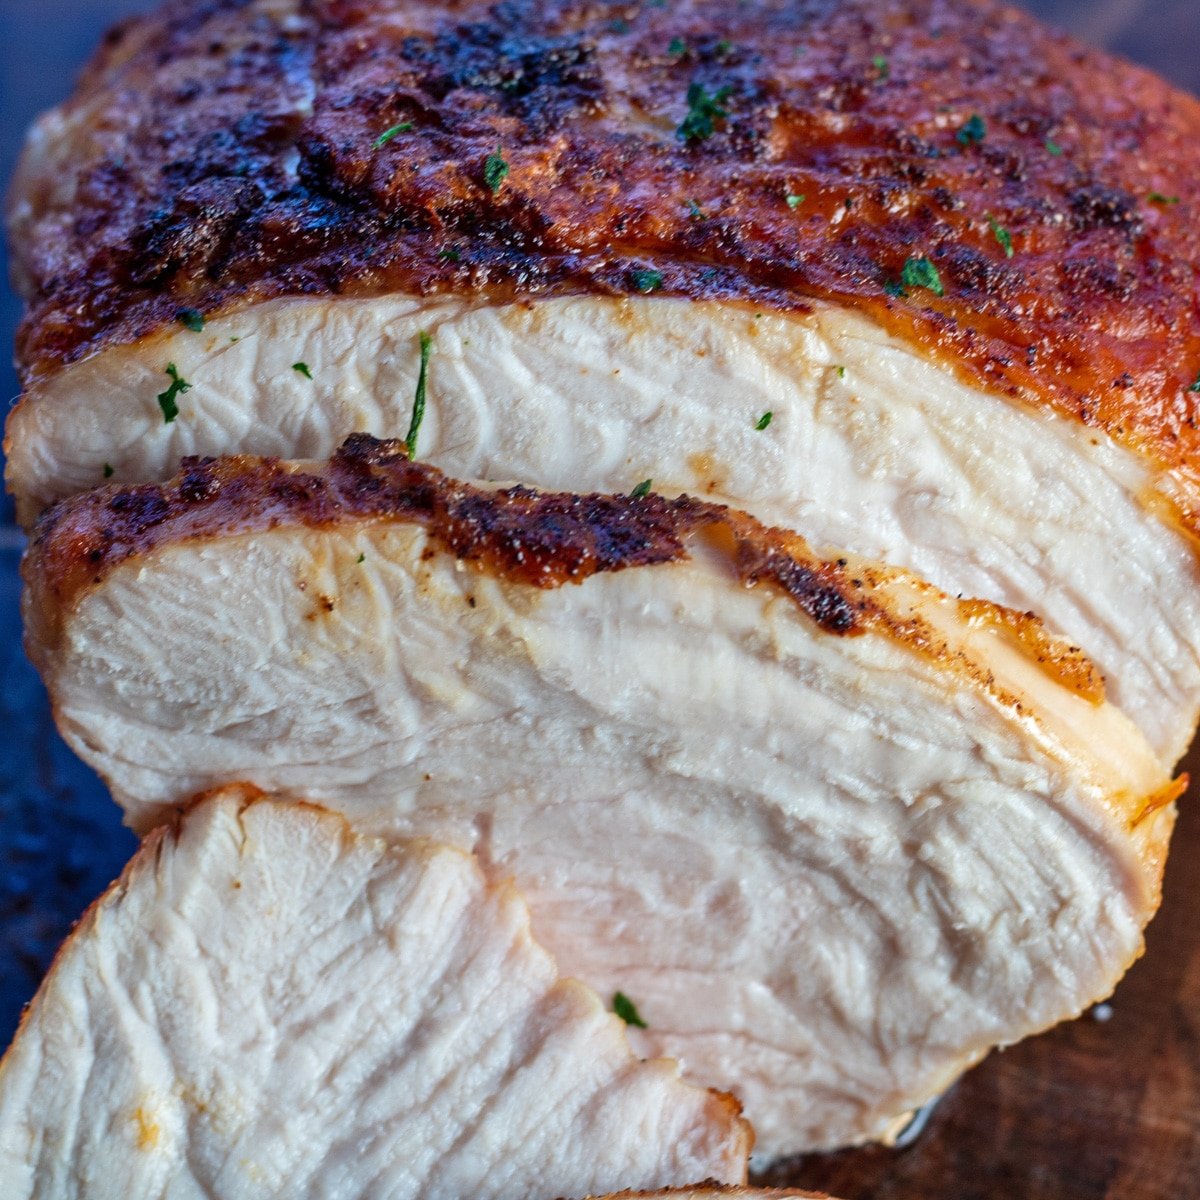 Closeup on the air fryer turkey breast sliced and served on wooden cutting board.